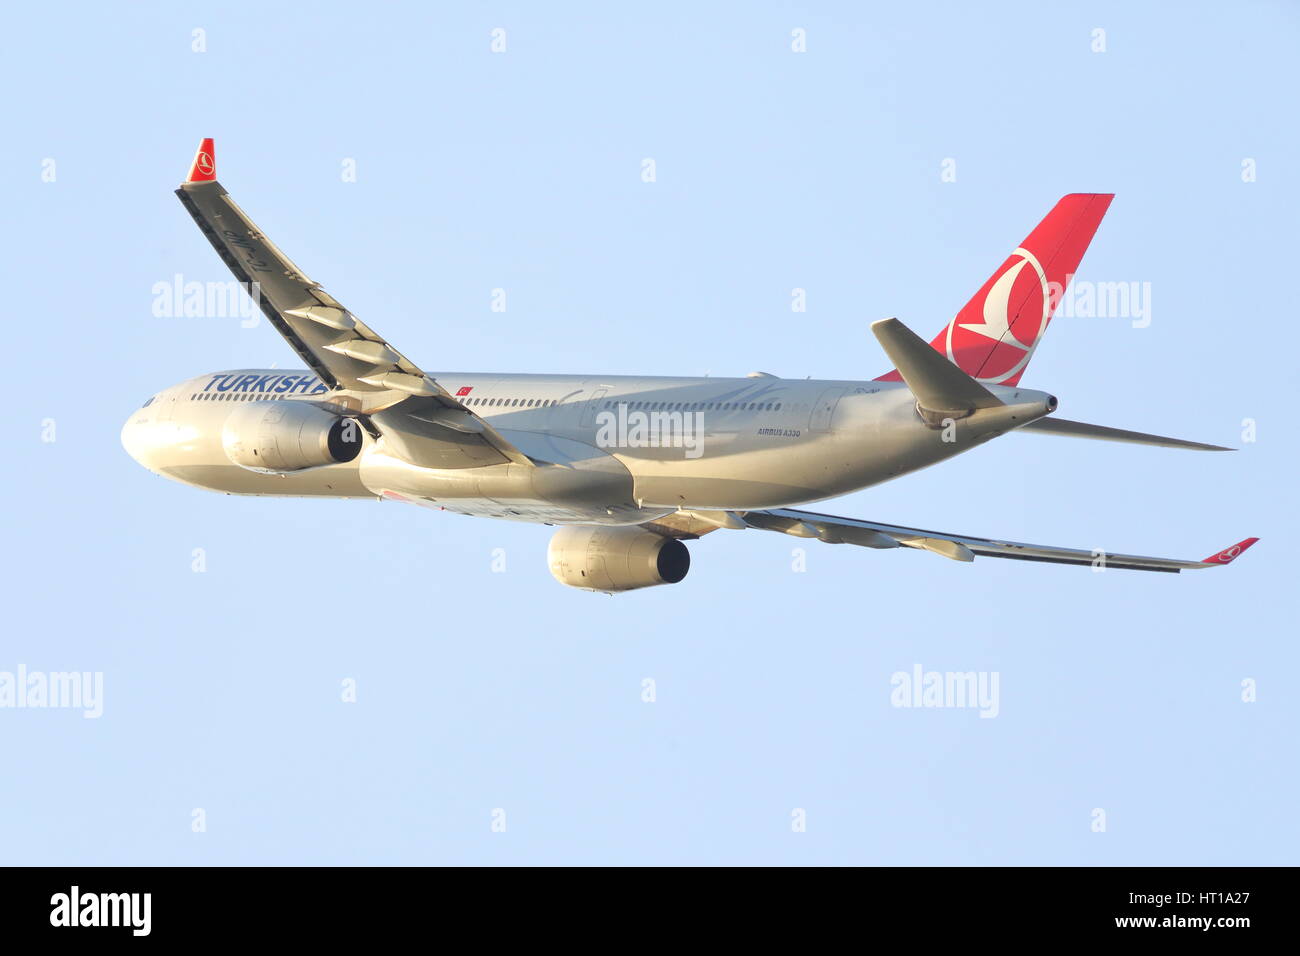 Turkish Airlines Airbus A330 TC-JNP departing from London Heathrow Airport, UK Stock Photo